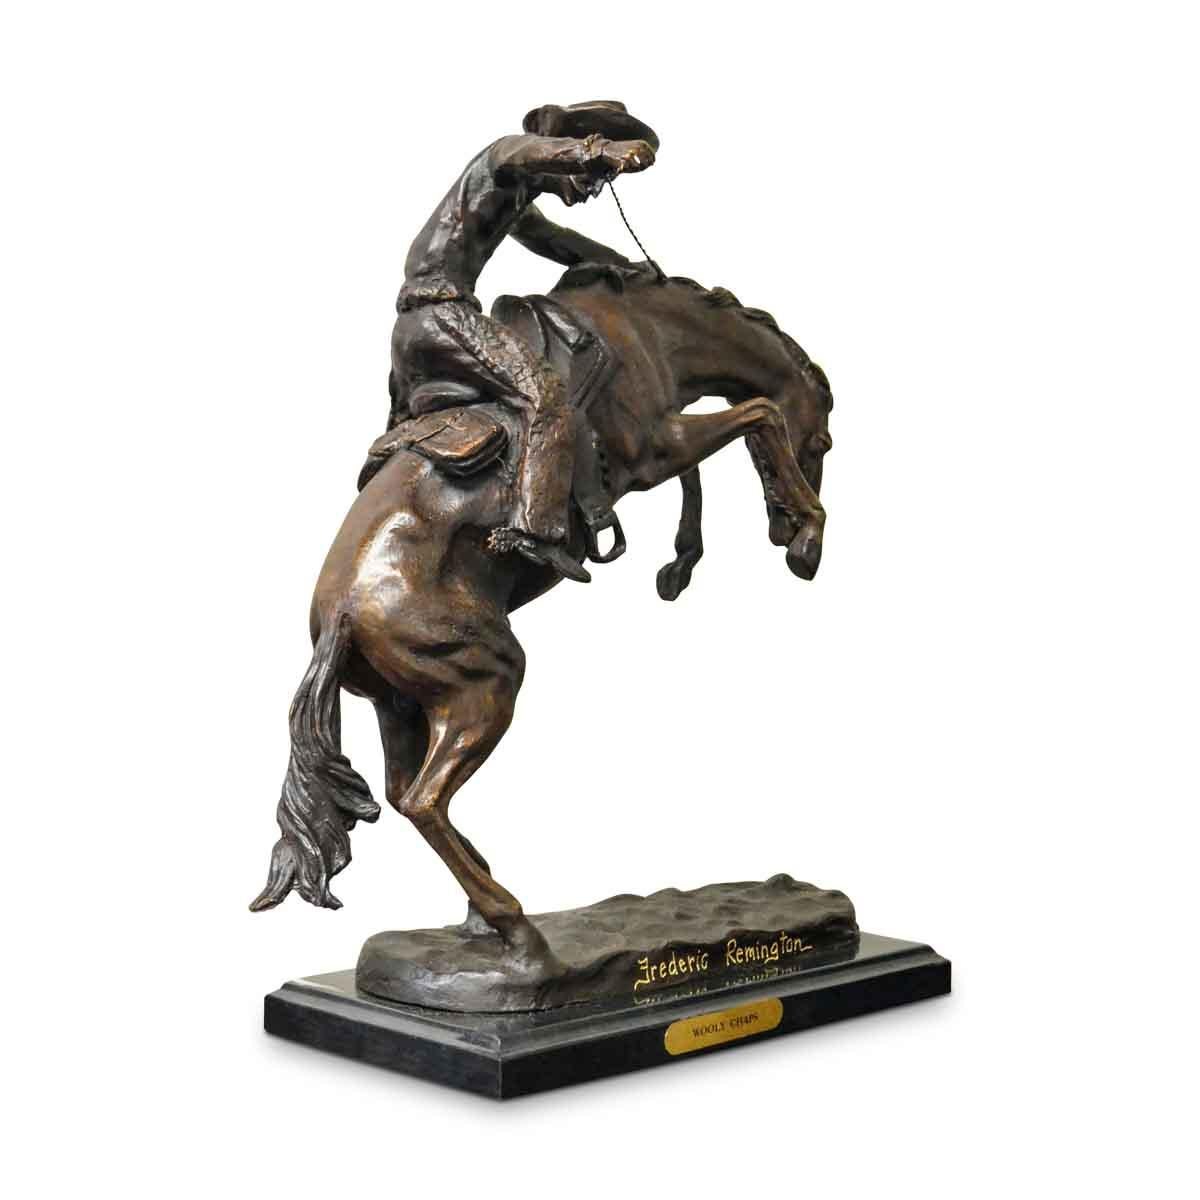 Wooly Chaps, a cast bronze sculpture after American artist Frederic Remington on marble base. A variation of his most famous sculpture, The Broncho Buster, Wooly Chaps is filled with a tremendous dramatic tension and depicts a scene from the